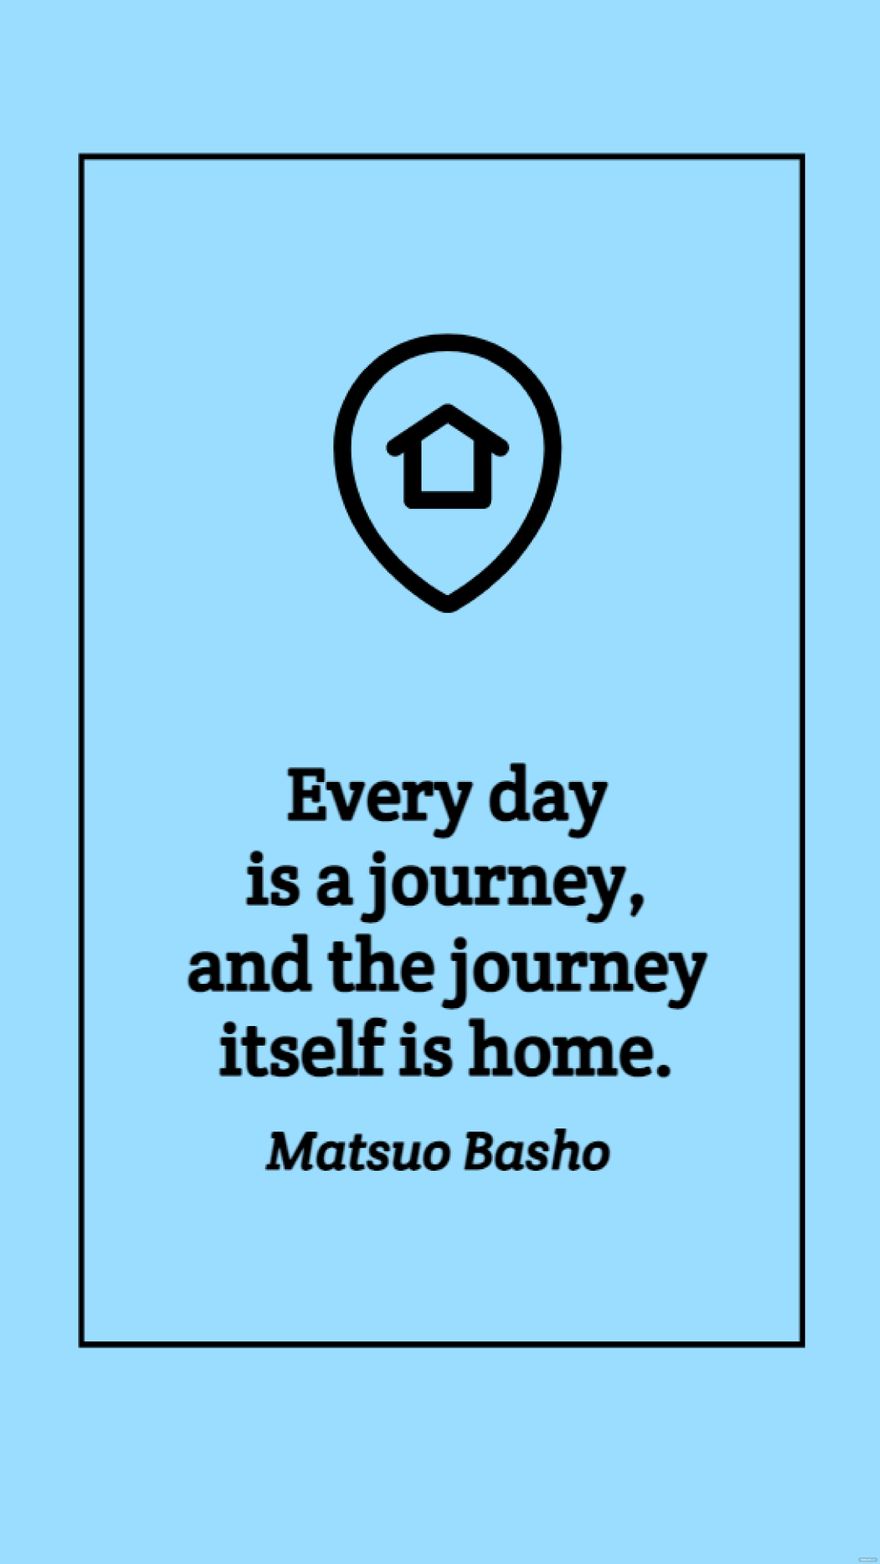 Matsuo Basho - Every day is a journey, and the journey itself is home.